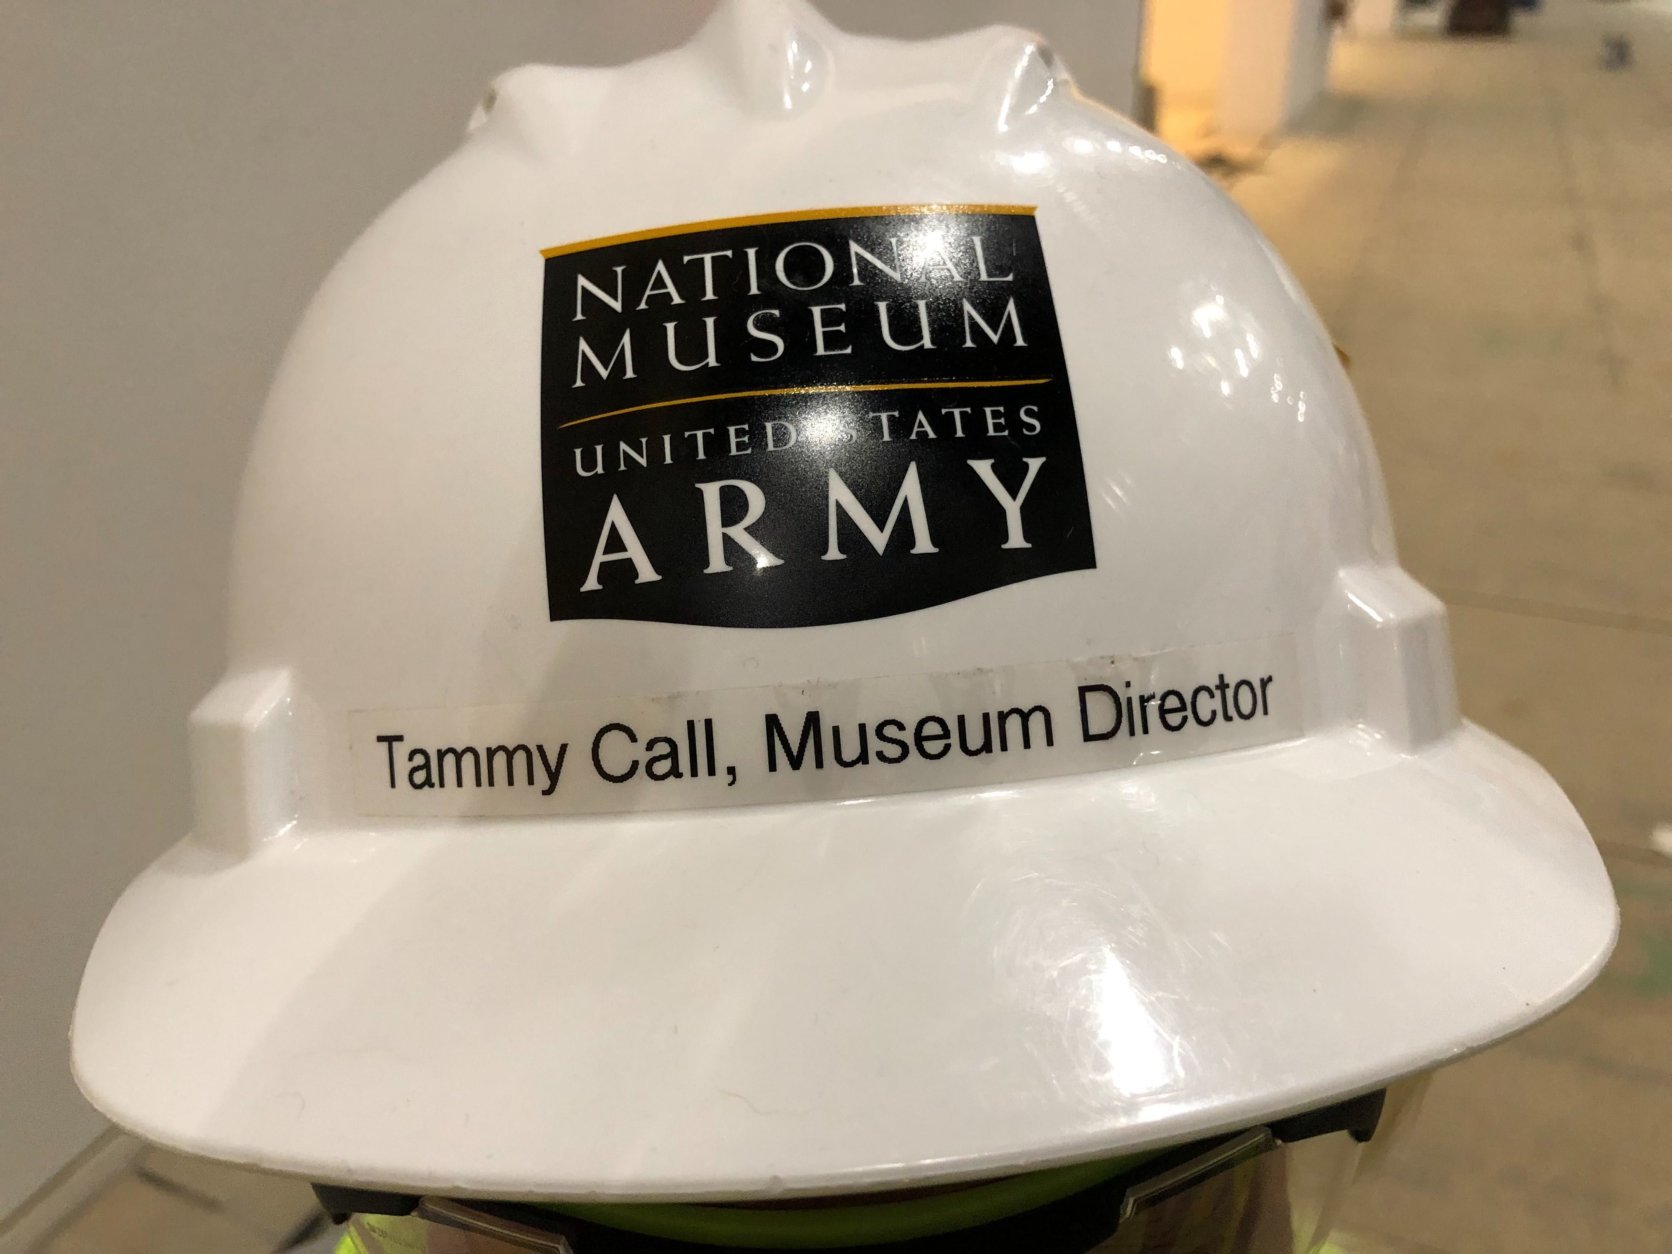 "When the doors open in 2020, this is America's Army museum," said Tammy Call, director of the National Museum of the U.S. Army. "We show the relationship between American society and our army as we formed, as we have fought, as we protect this nation." (WTOP/Kristi King)